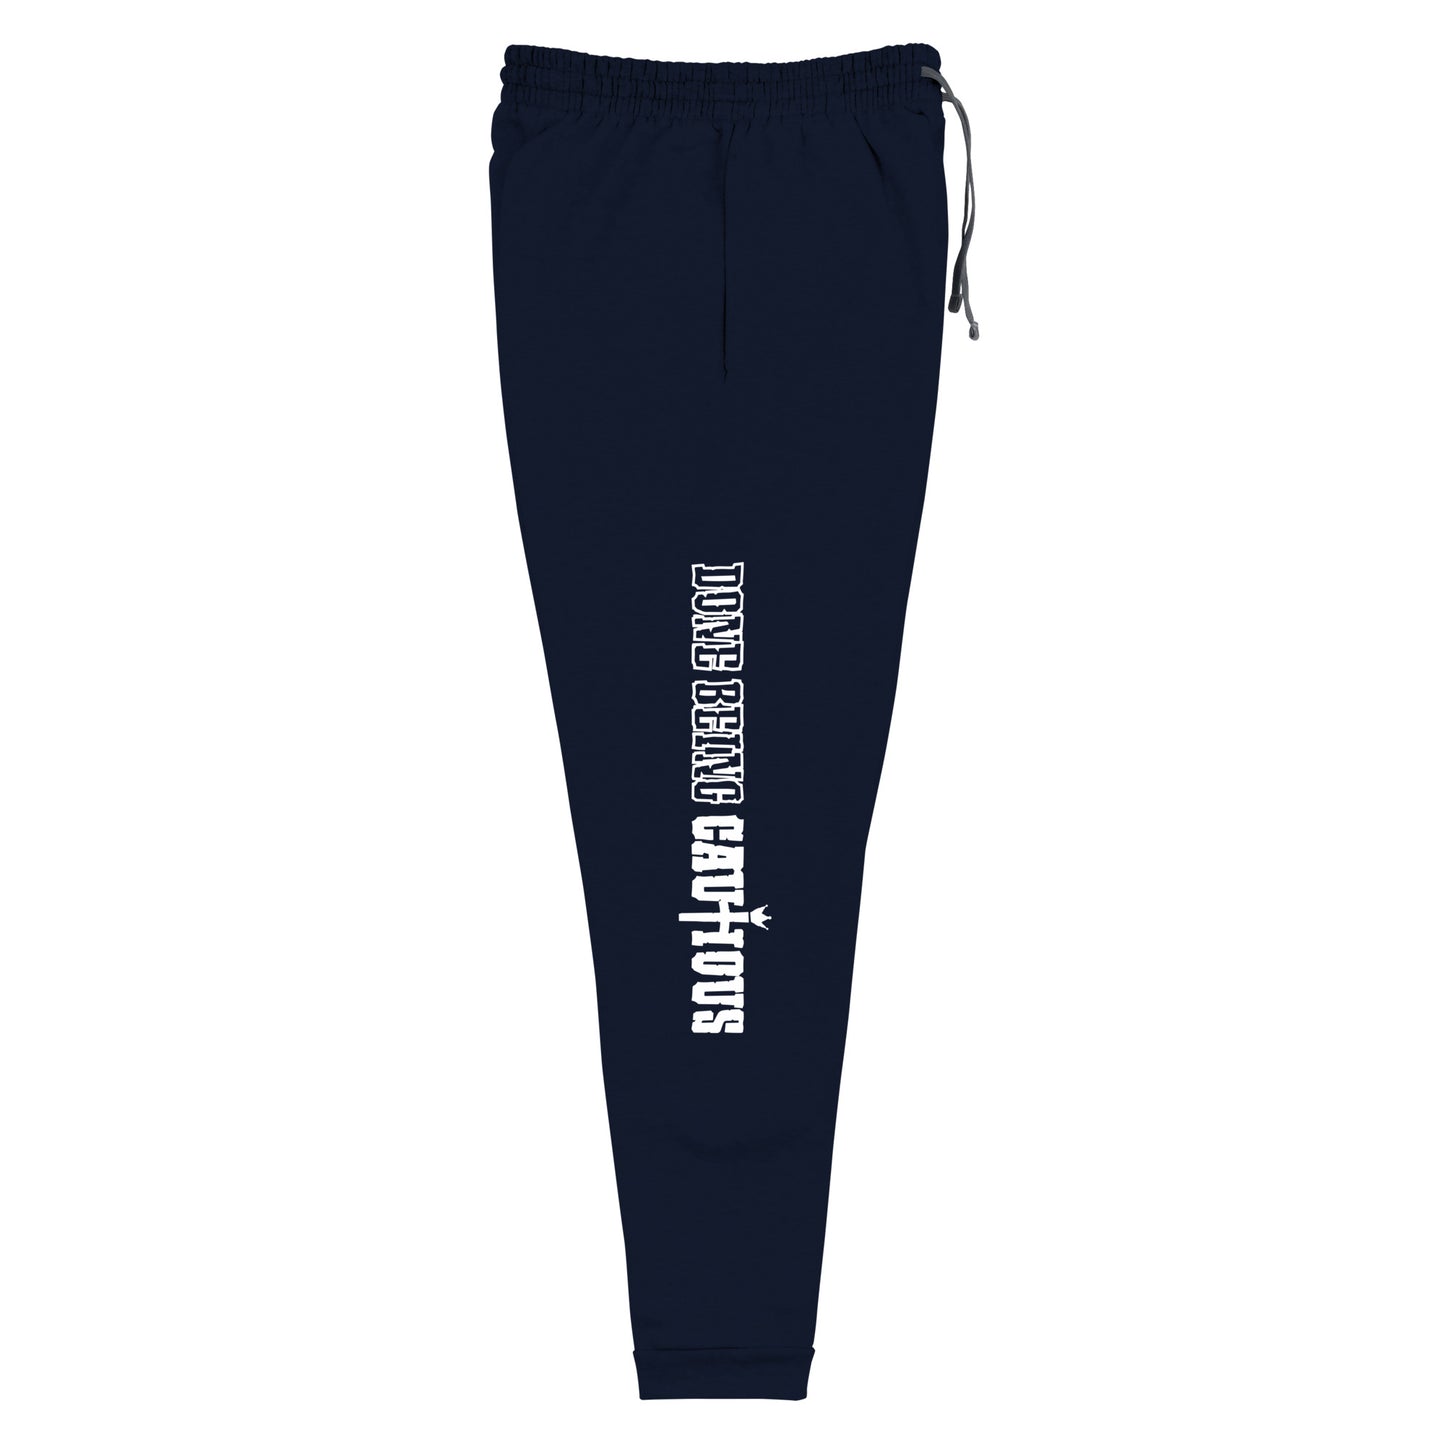 Done Being Cautious Signature Monotone Joggers (3 colors)